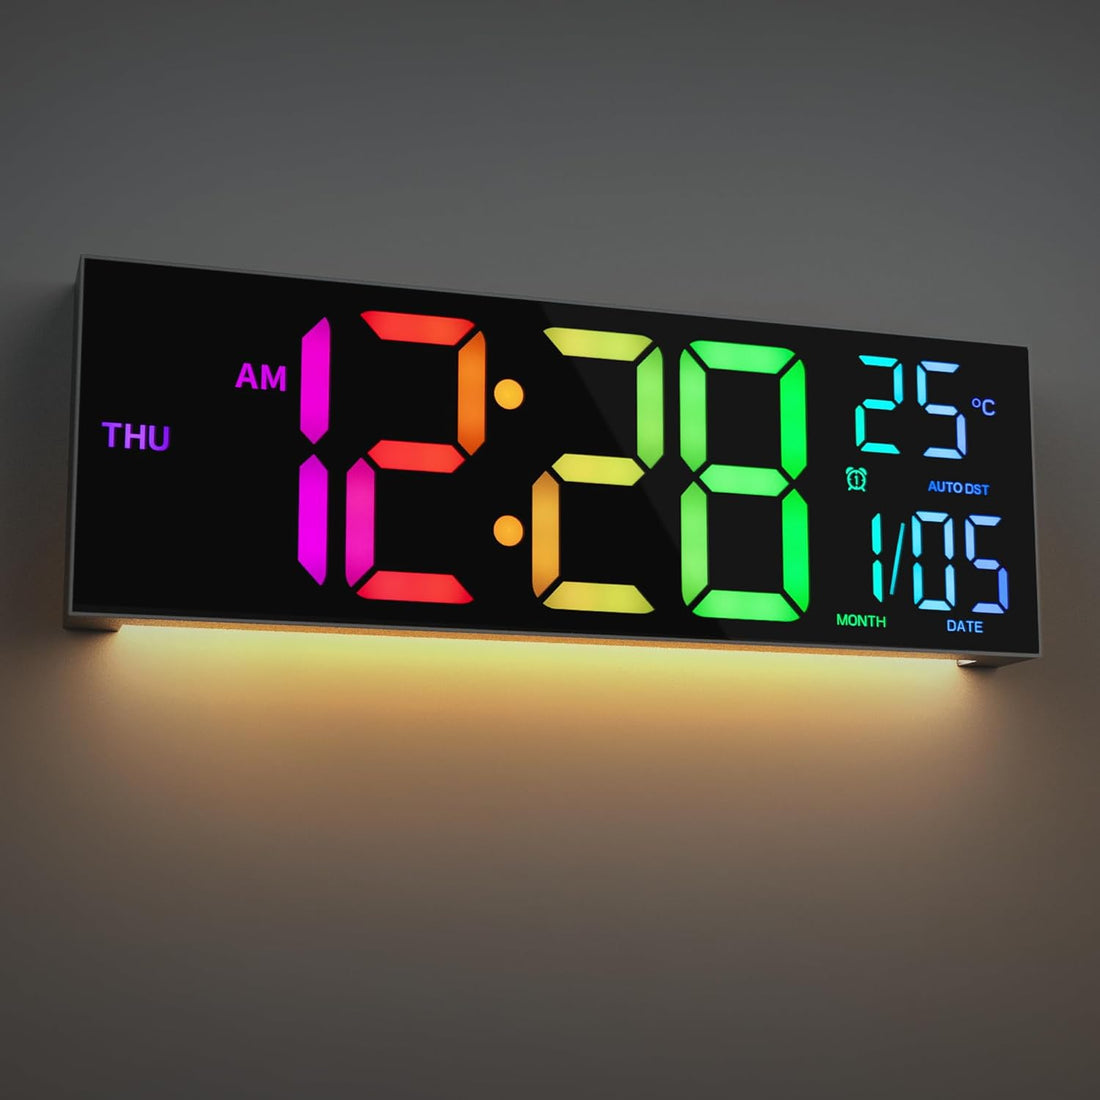 Maxstar Large Digital Wall Clock 16.2 inch Display, with RGB Color,Temperature,Remote Control,4 Level Brightness Dimmer,Night Light,2 Alarm,12/24H,DST Perfect for Home/Office/Garage/Gym/School